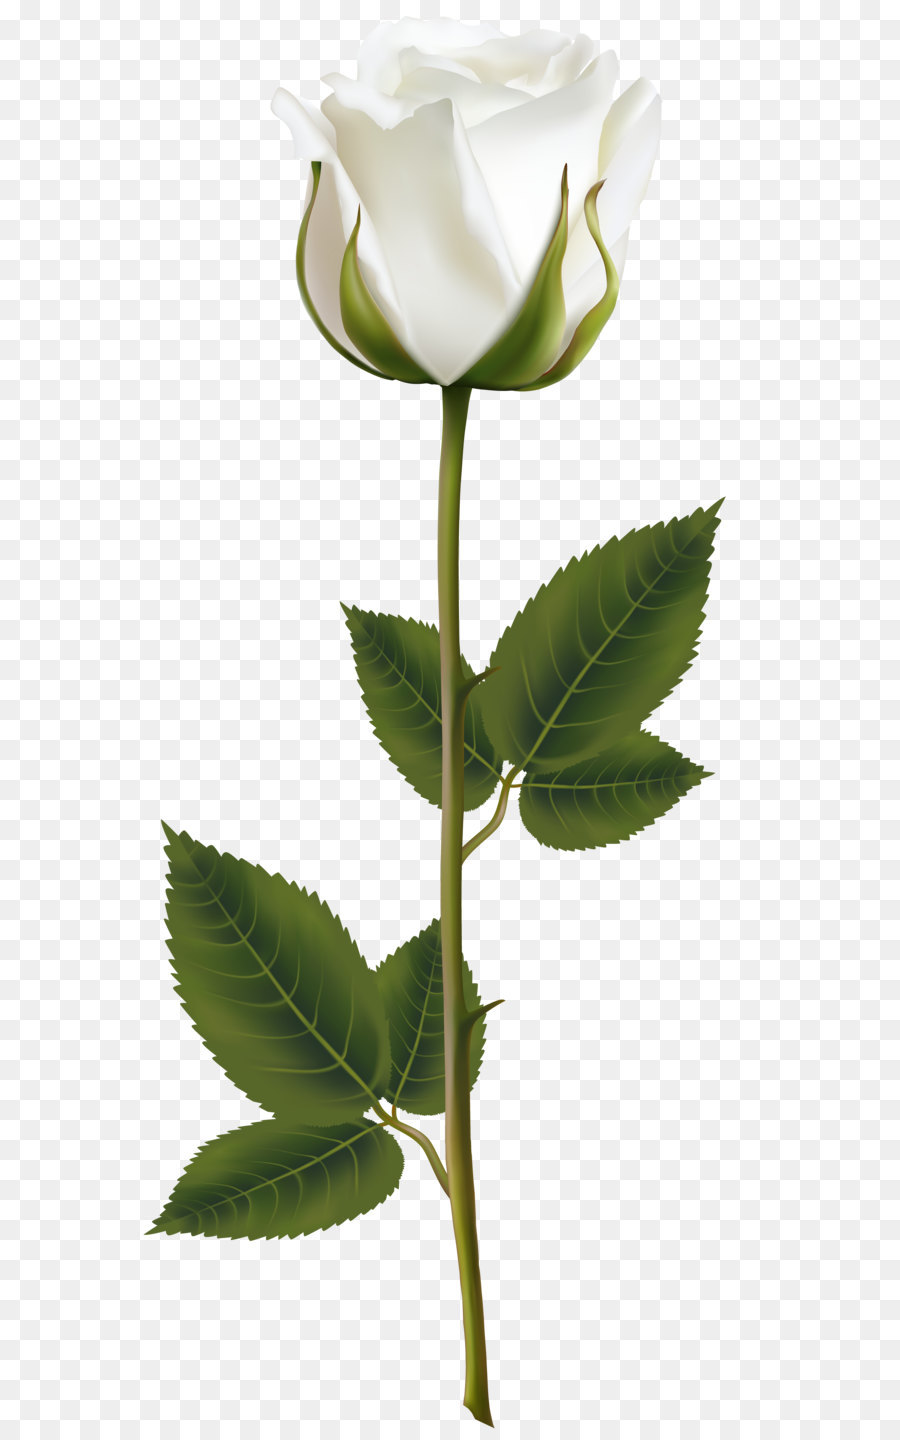 Rose White Clip art - White Rose with Stem PNG Transparent Clip Art Image png download - 3632*8000 - Free Transparent Rose png Download.